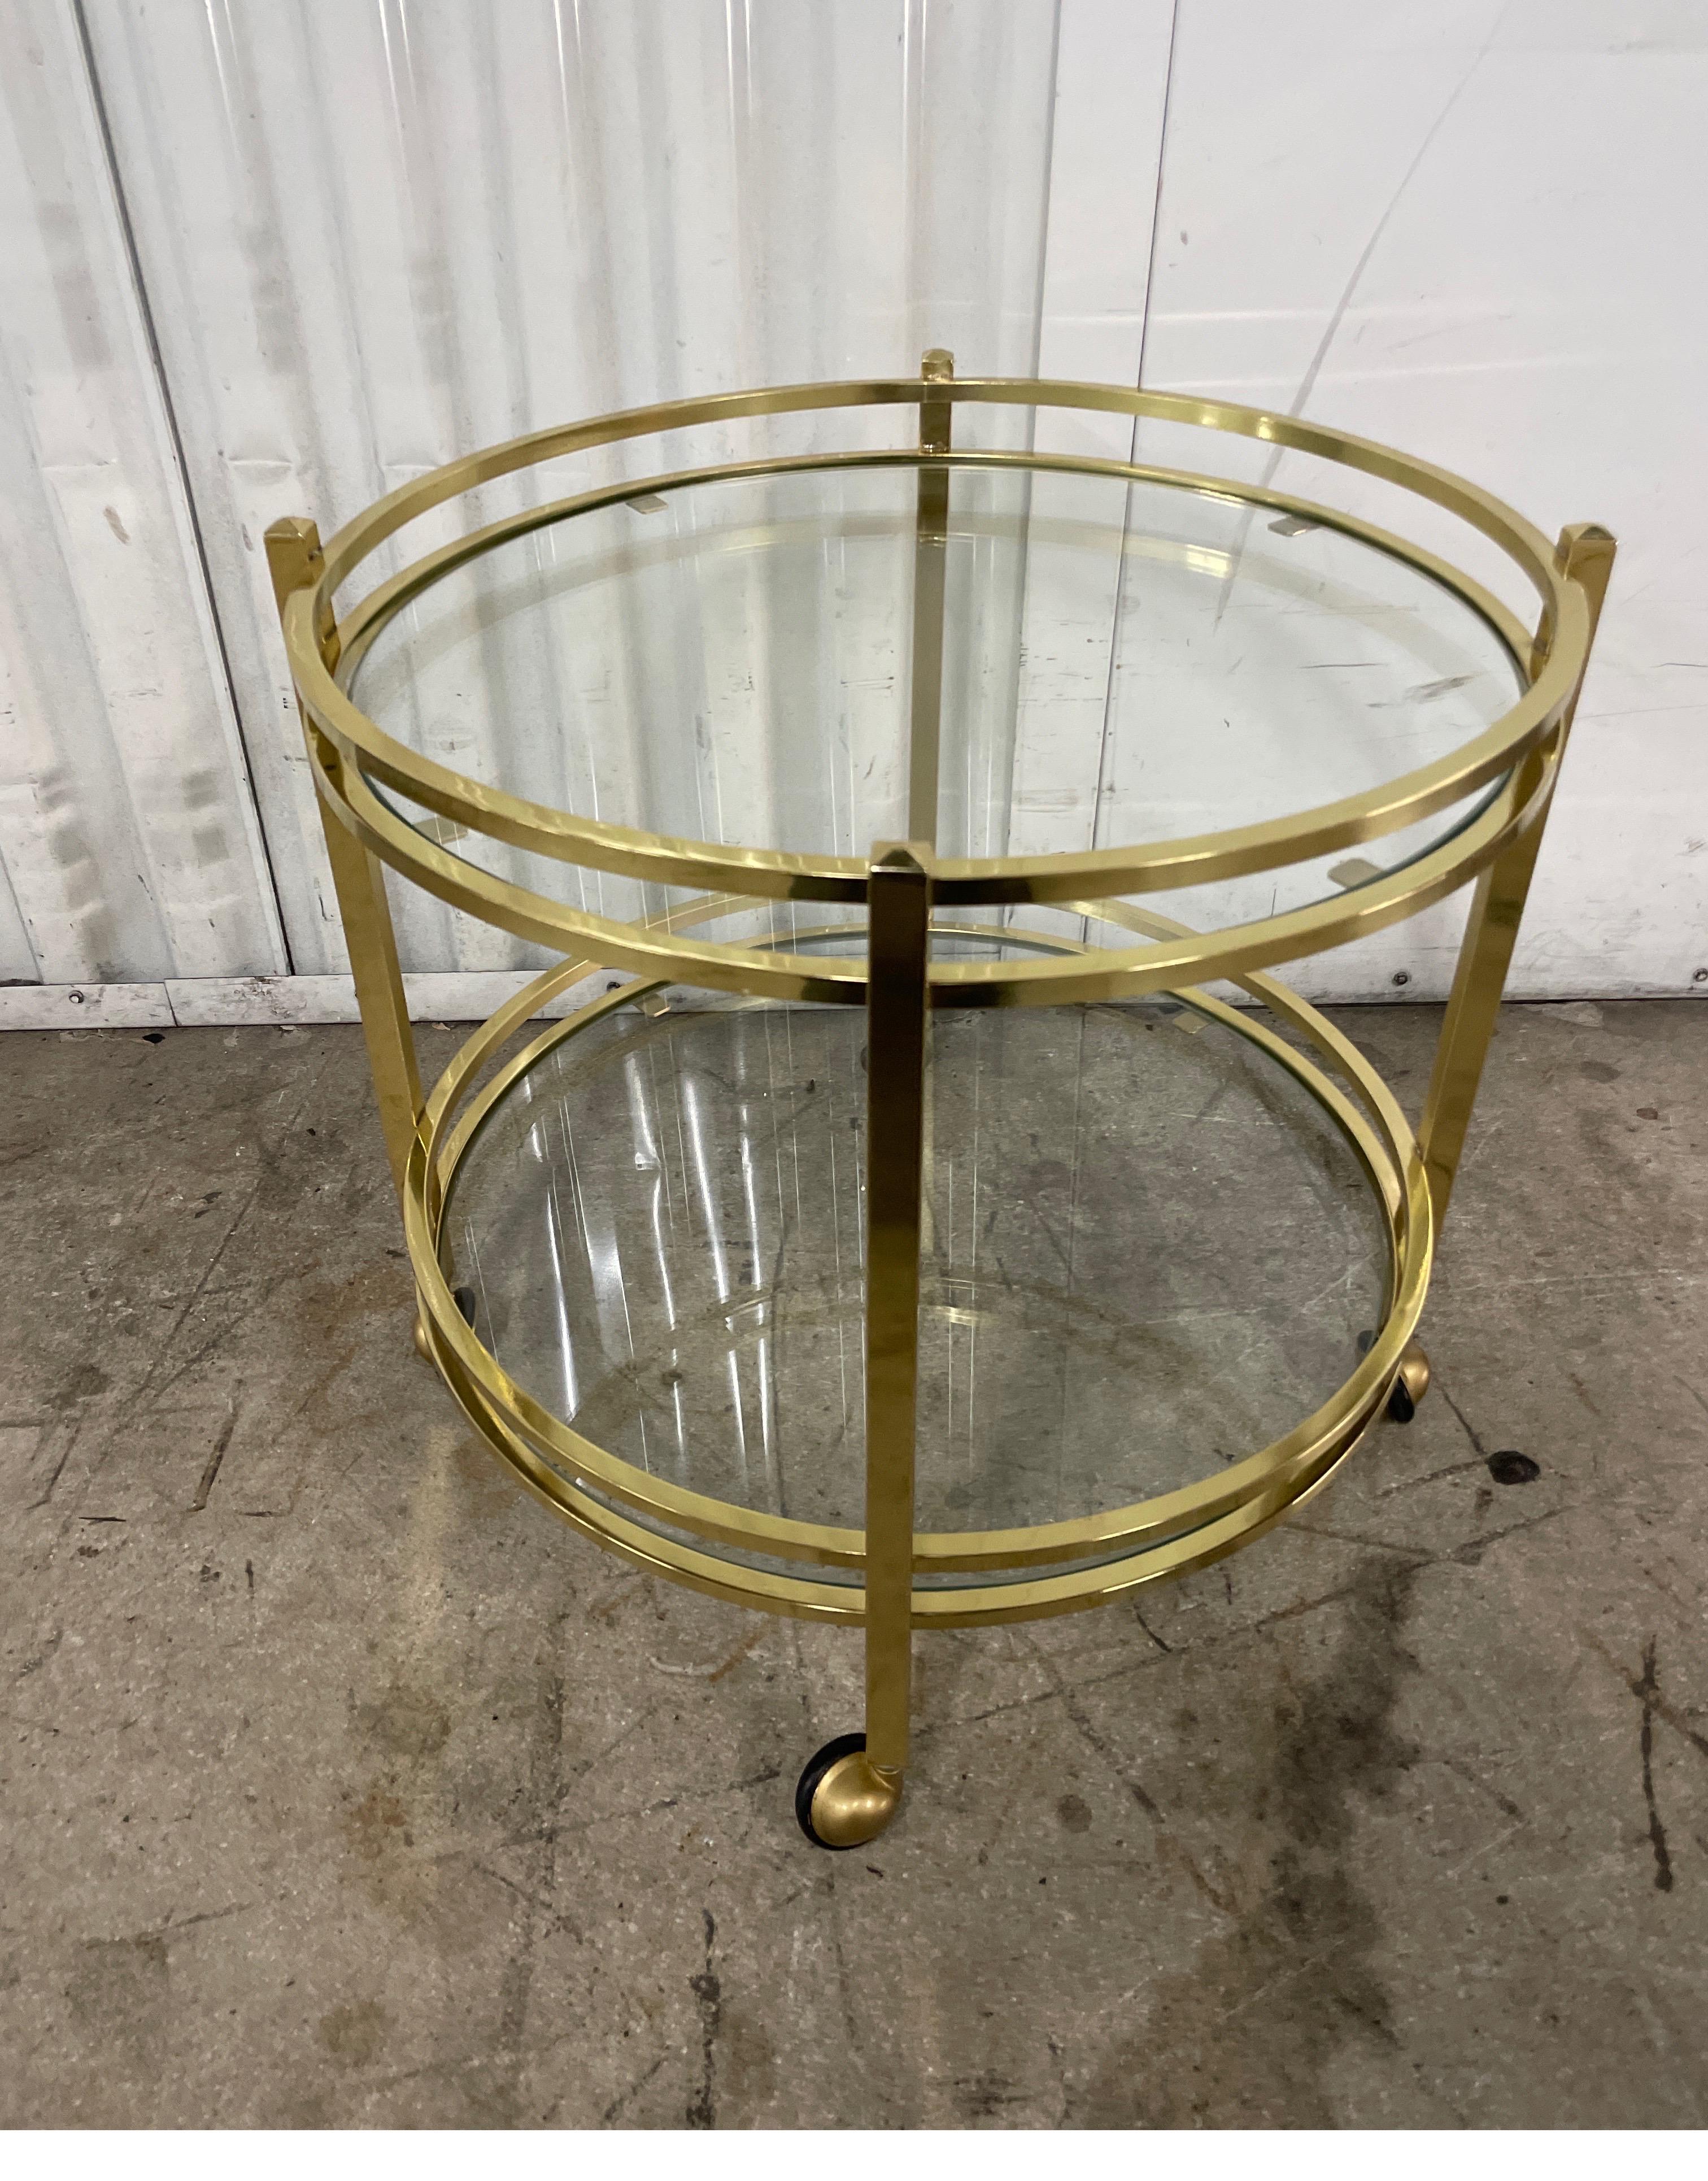 Sweet small two tiered Italian brass round cart on casters. Great little versatile piece with a multiple of uses. Perfect next to a chair as a drinks table. Also, a great bar cart for that small nook.